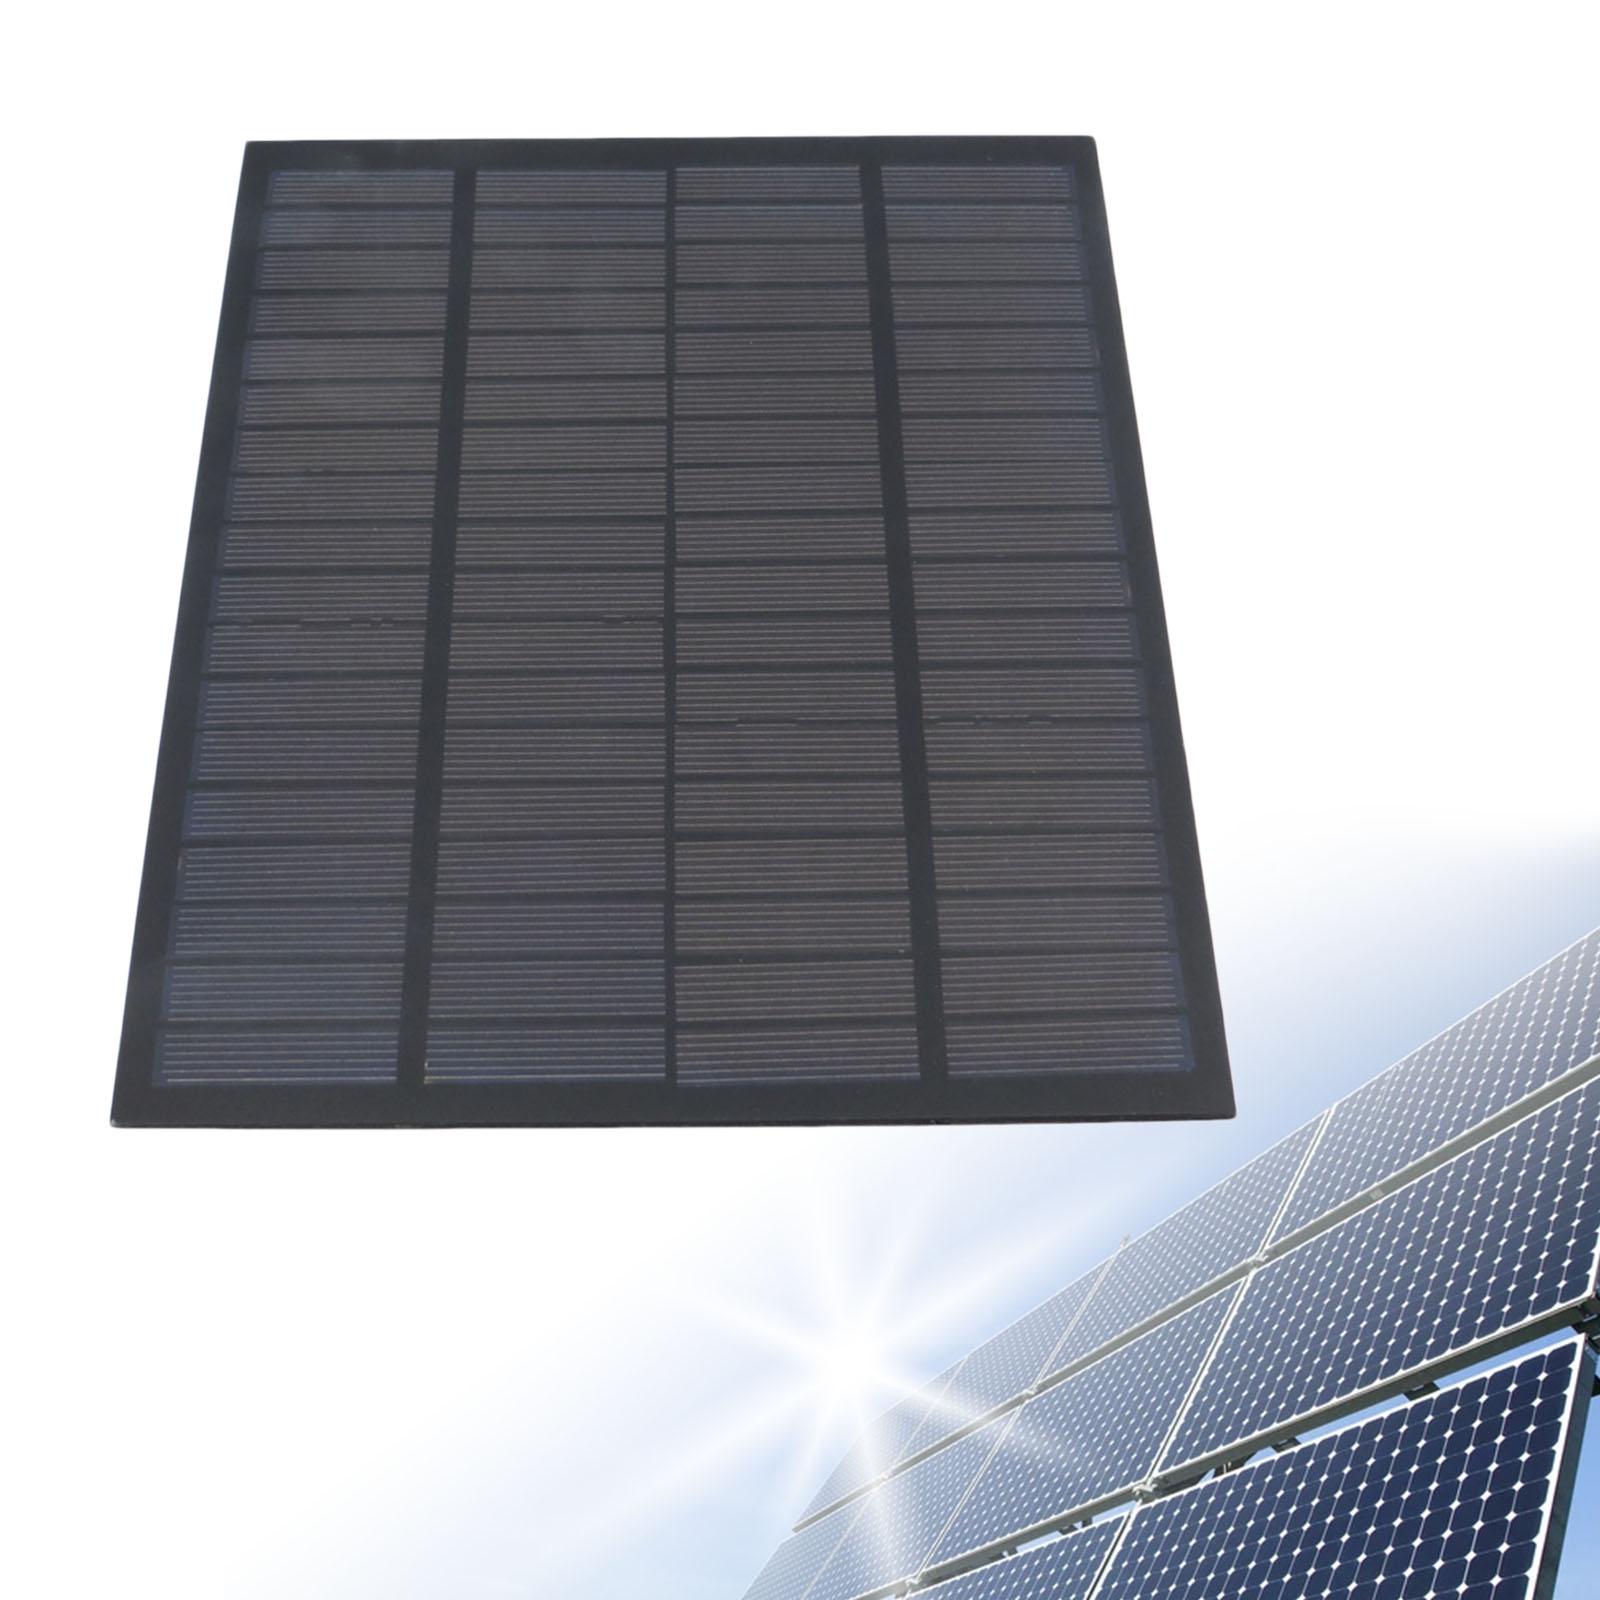 Mini Solar Panel Power Small Polycrystalline Solar Cell Panel Module For DIY Without Wire